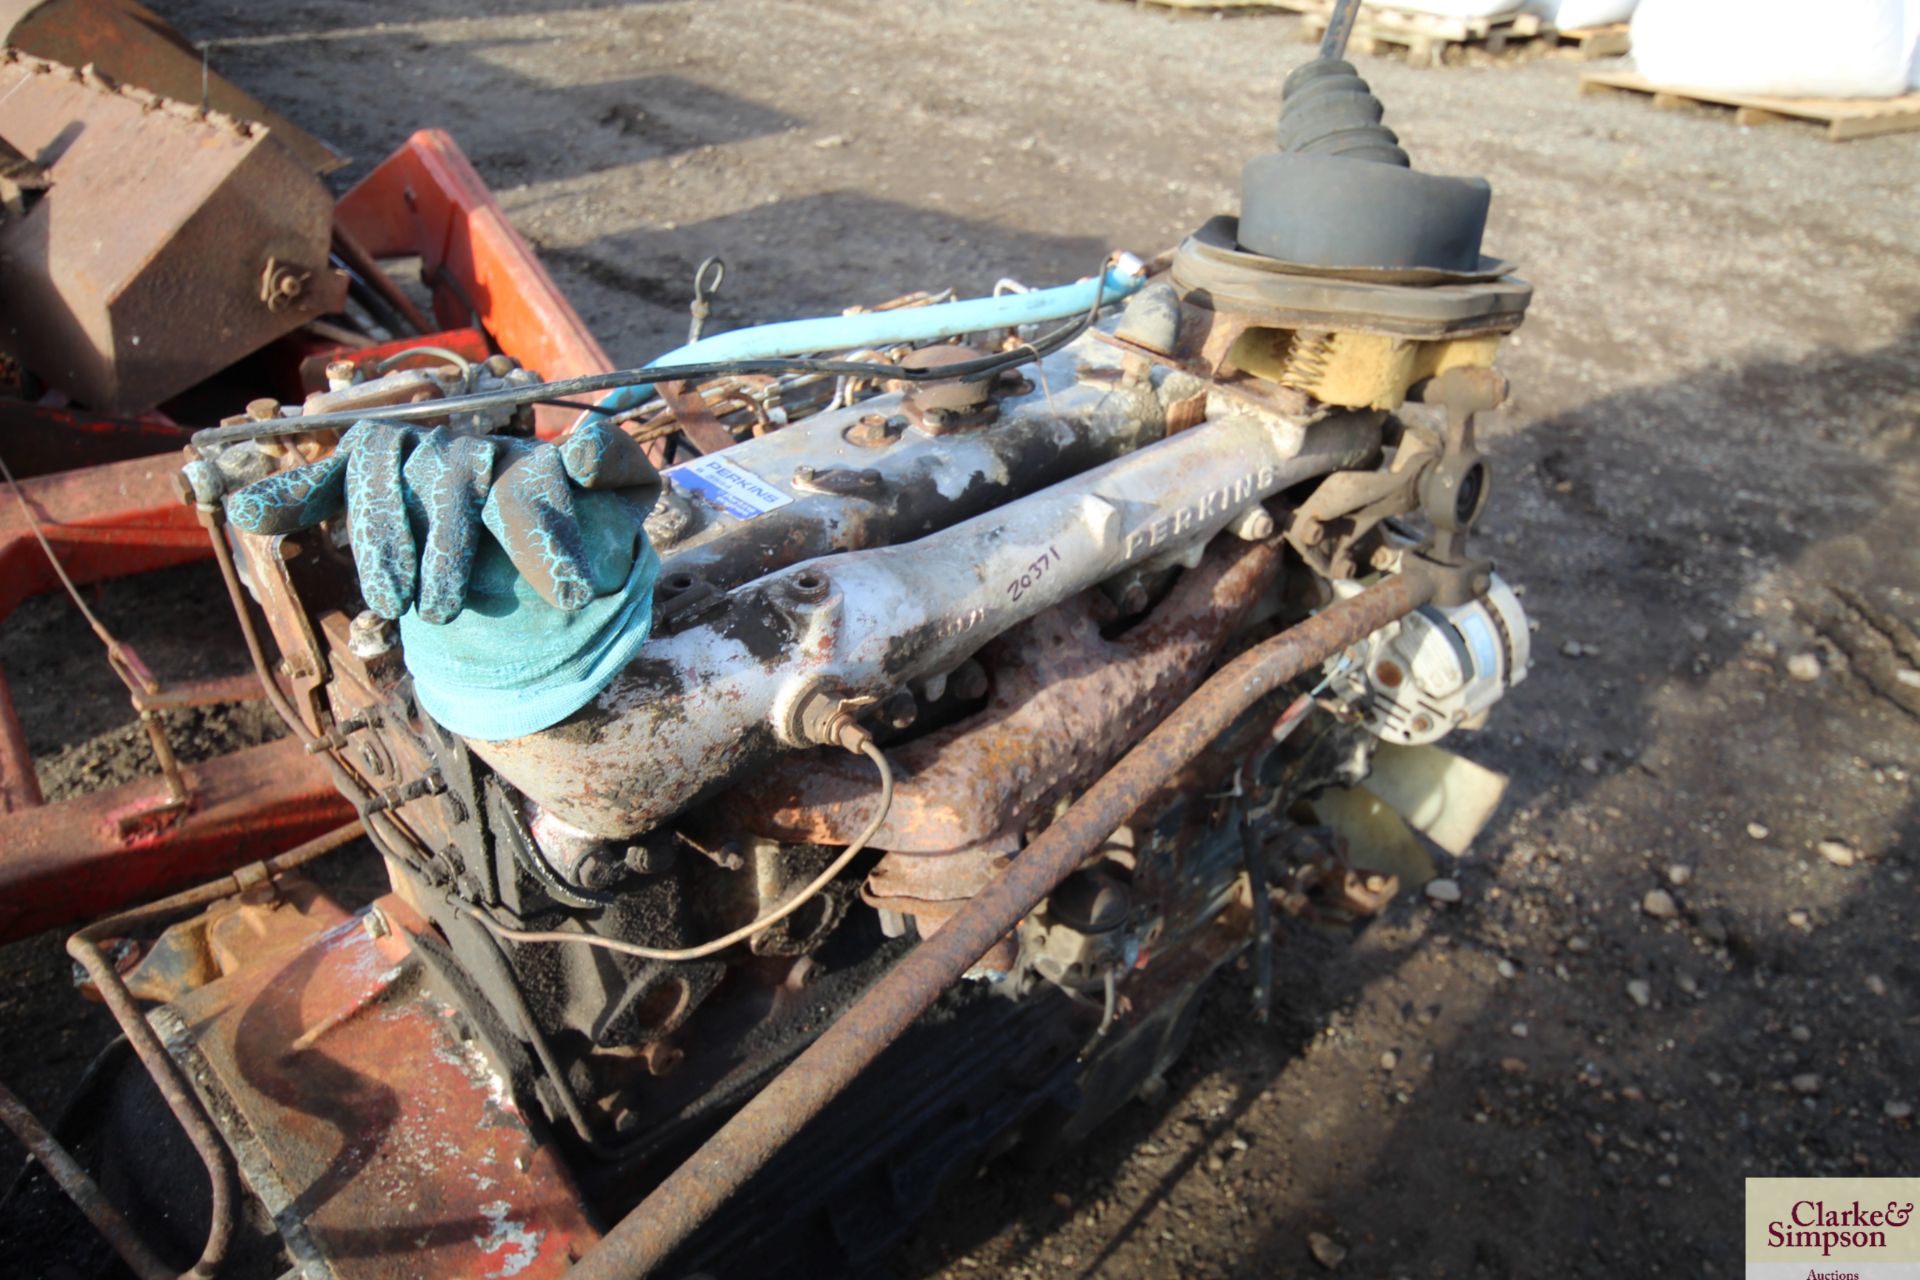 Perkins dot4 6cyl engine and gearbox. V - Image 7 of 9